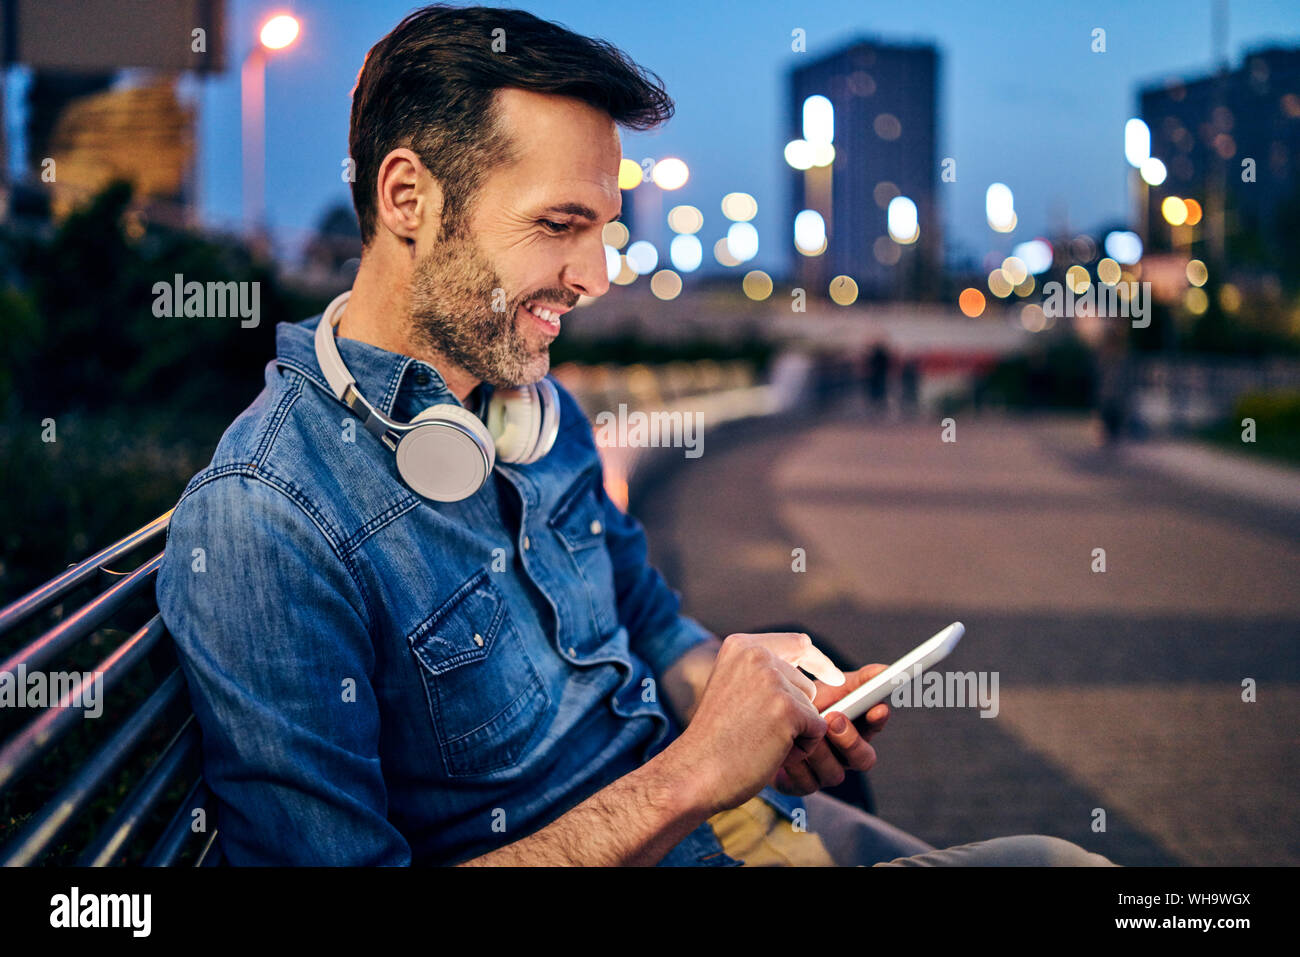 Smiling man using his smartphone while sitting on a bench in the evening Stock Photo